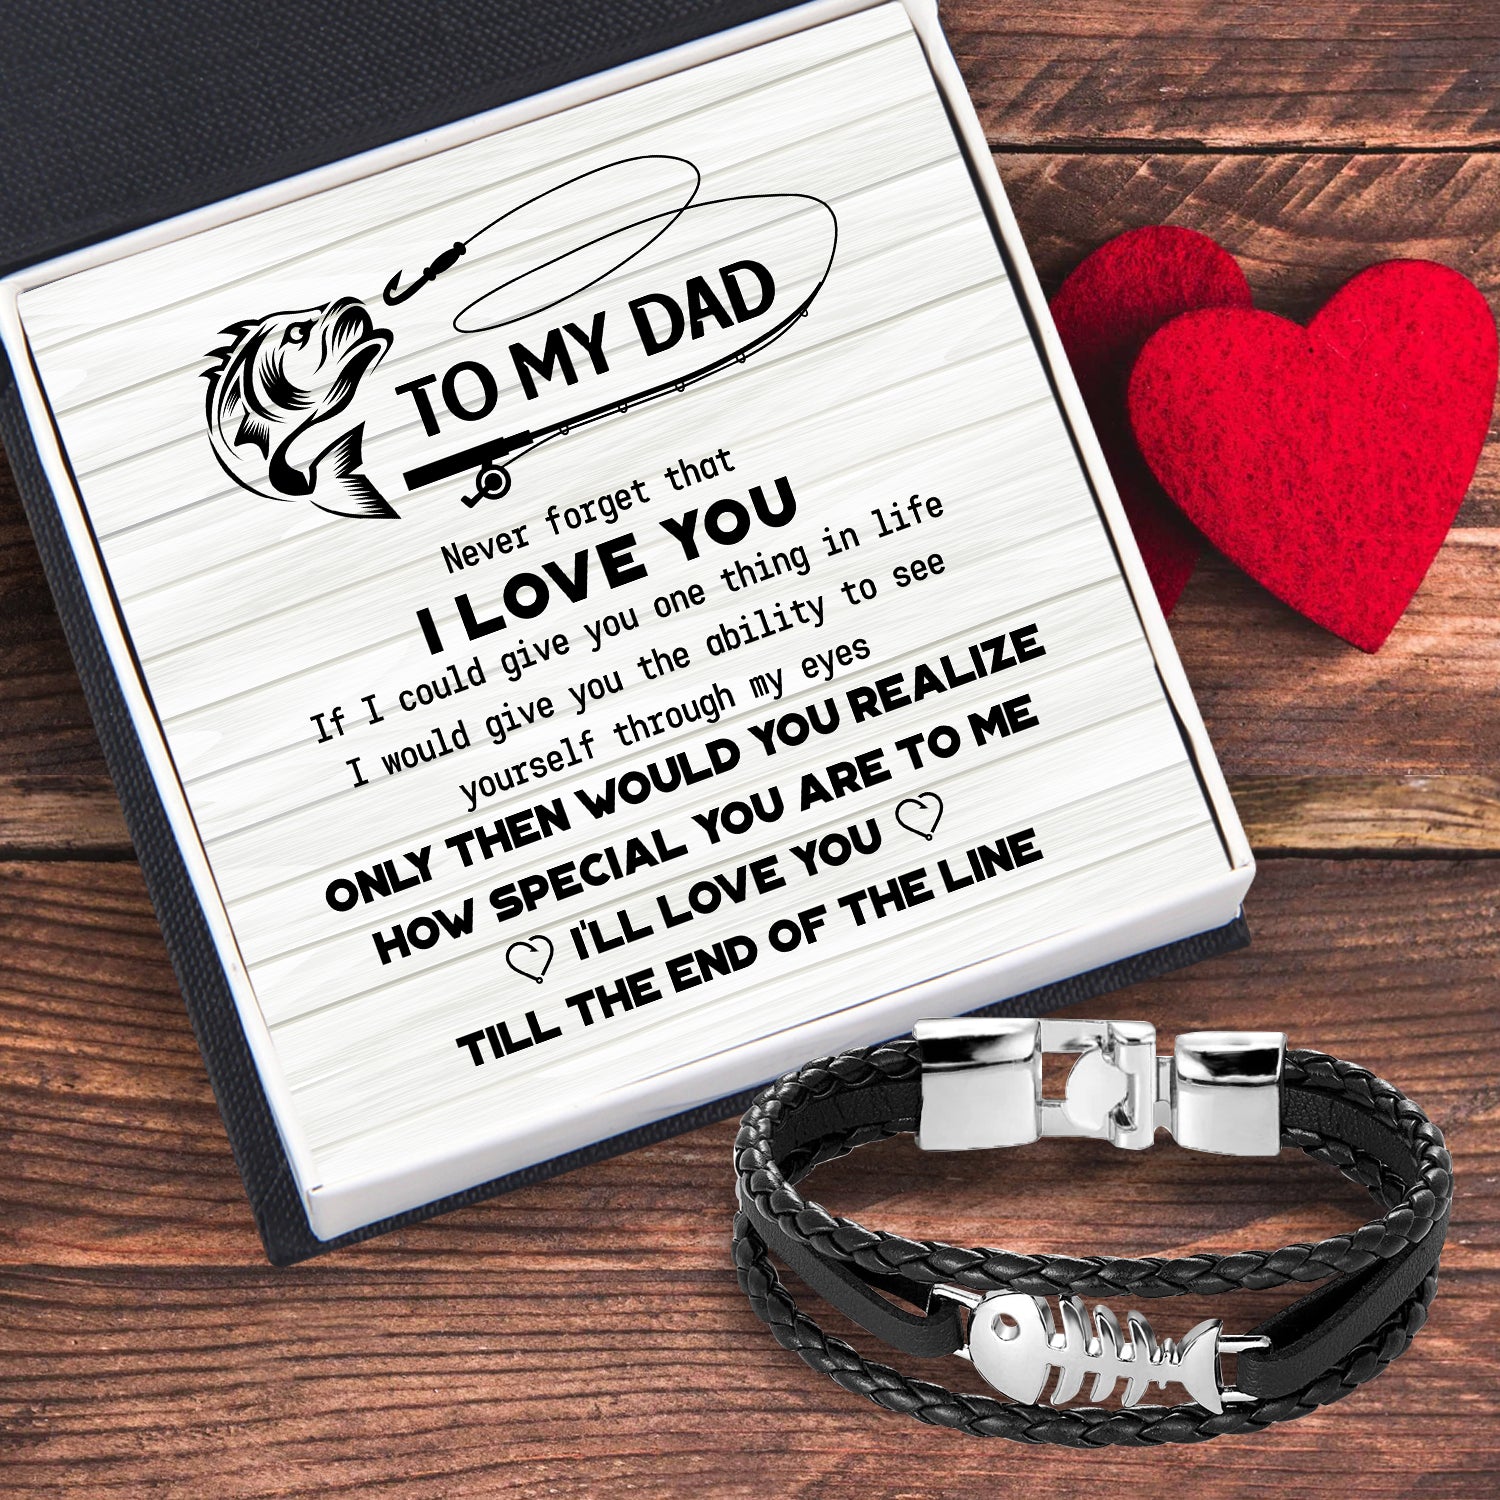 Fish Leather Bracelet - Fishing - To My Dad - How Special You Are To Me - Ukgbzp18001 Black / Standard Box